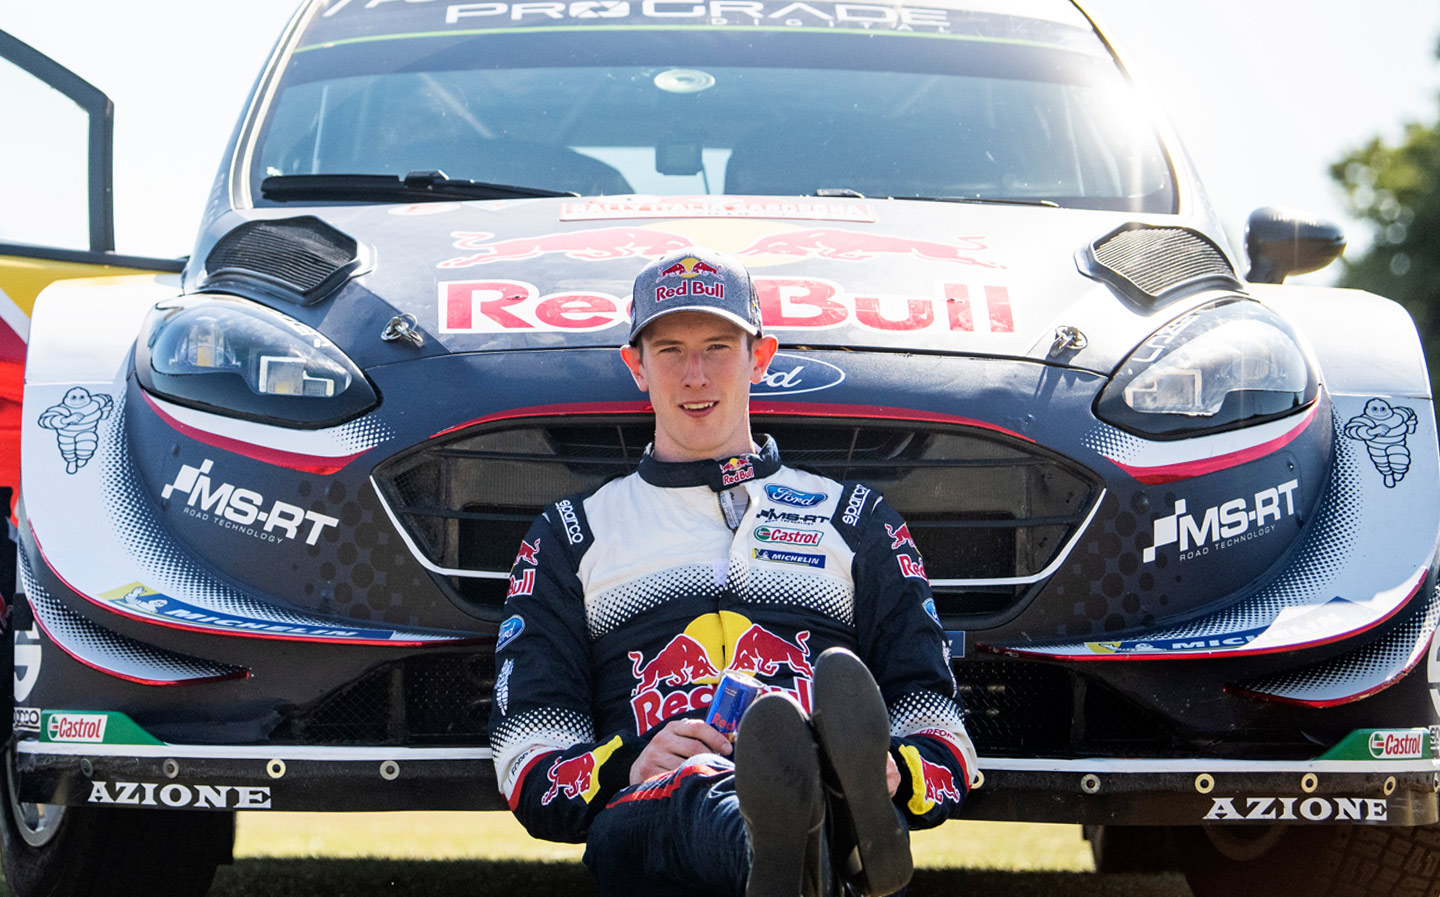 Elfyn Evans interview by Will Dron for Sunday Times Driving.co.uk